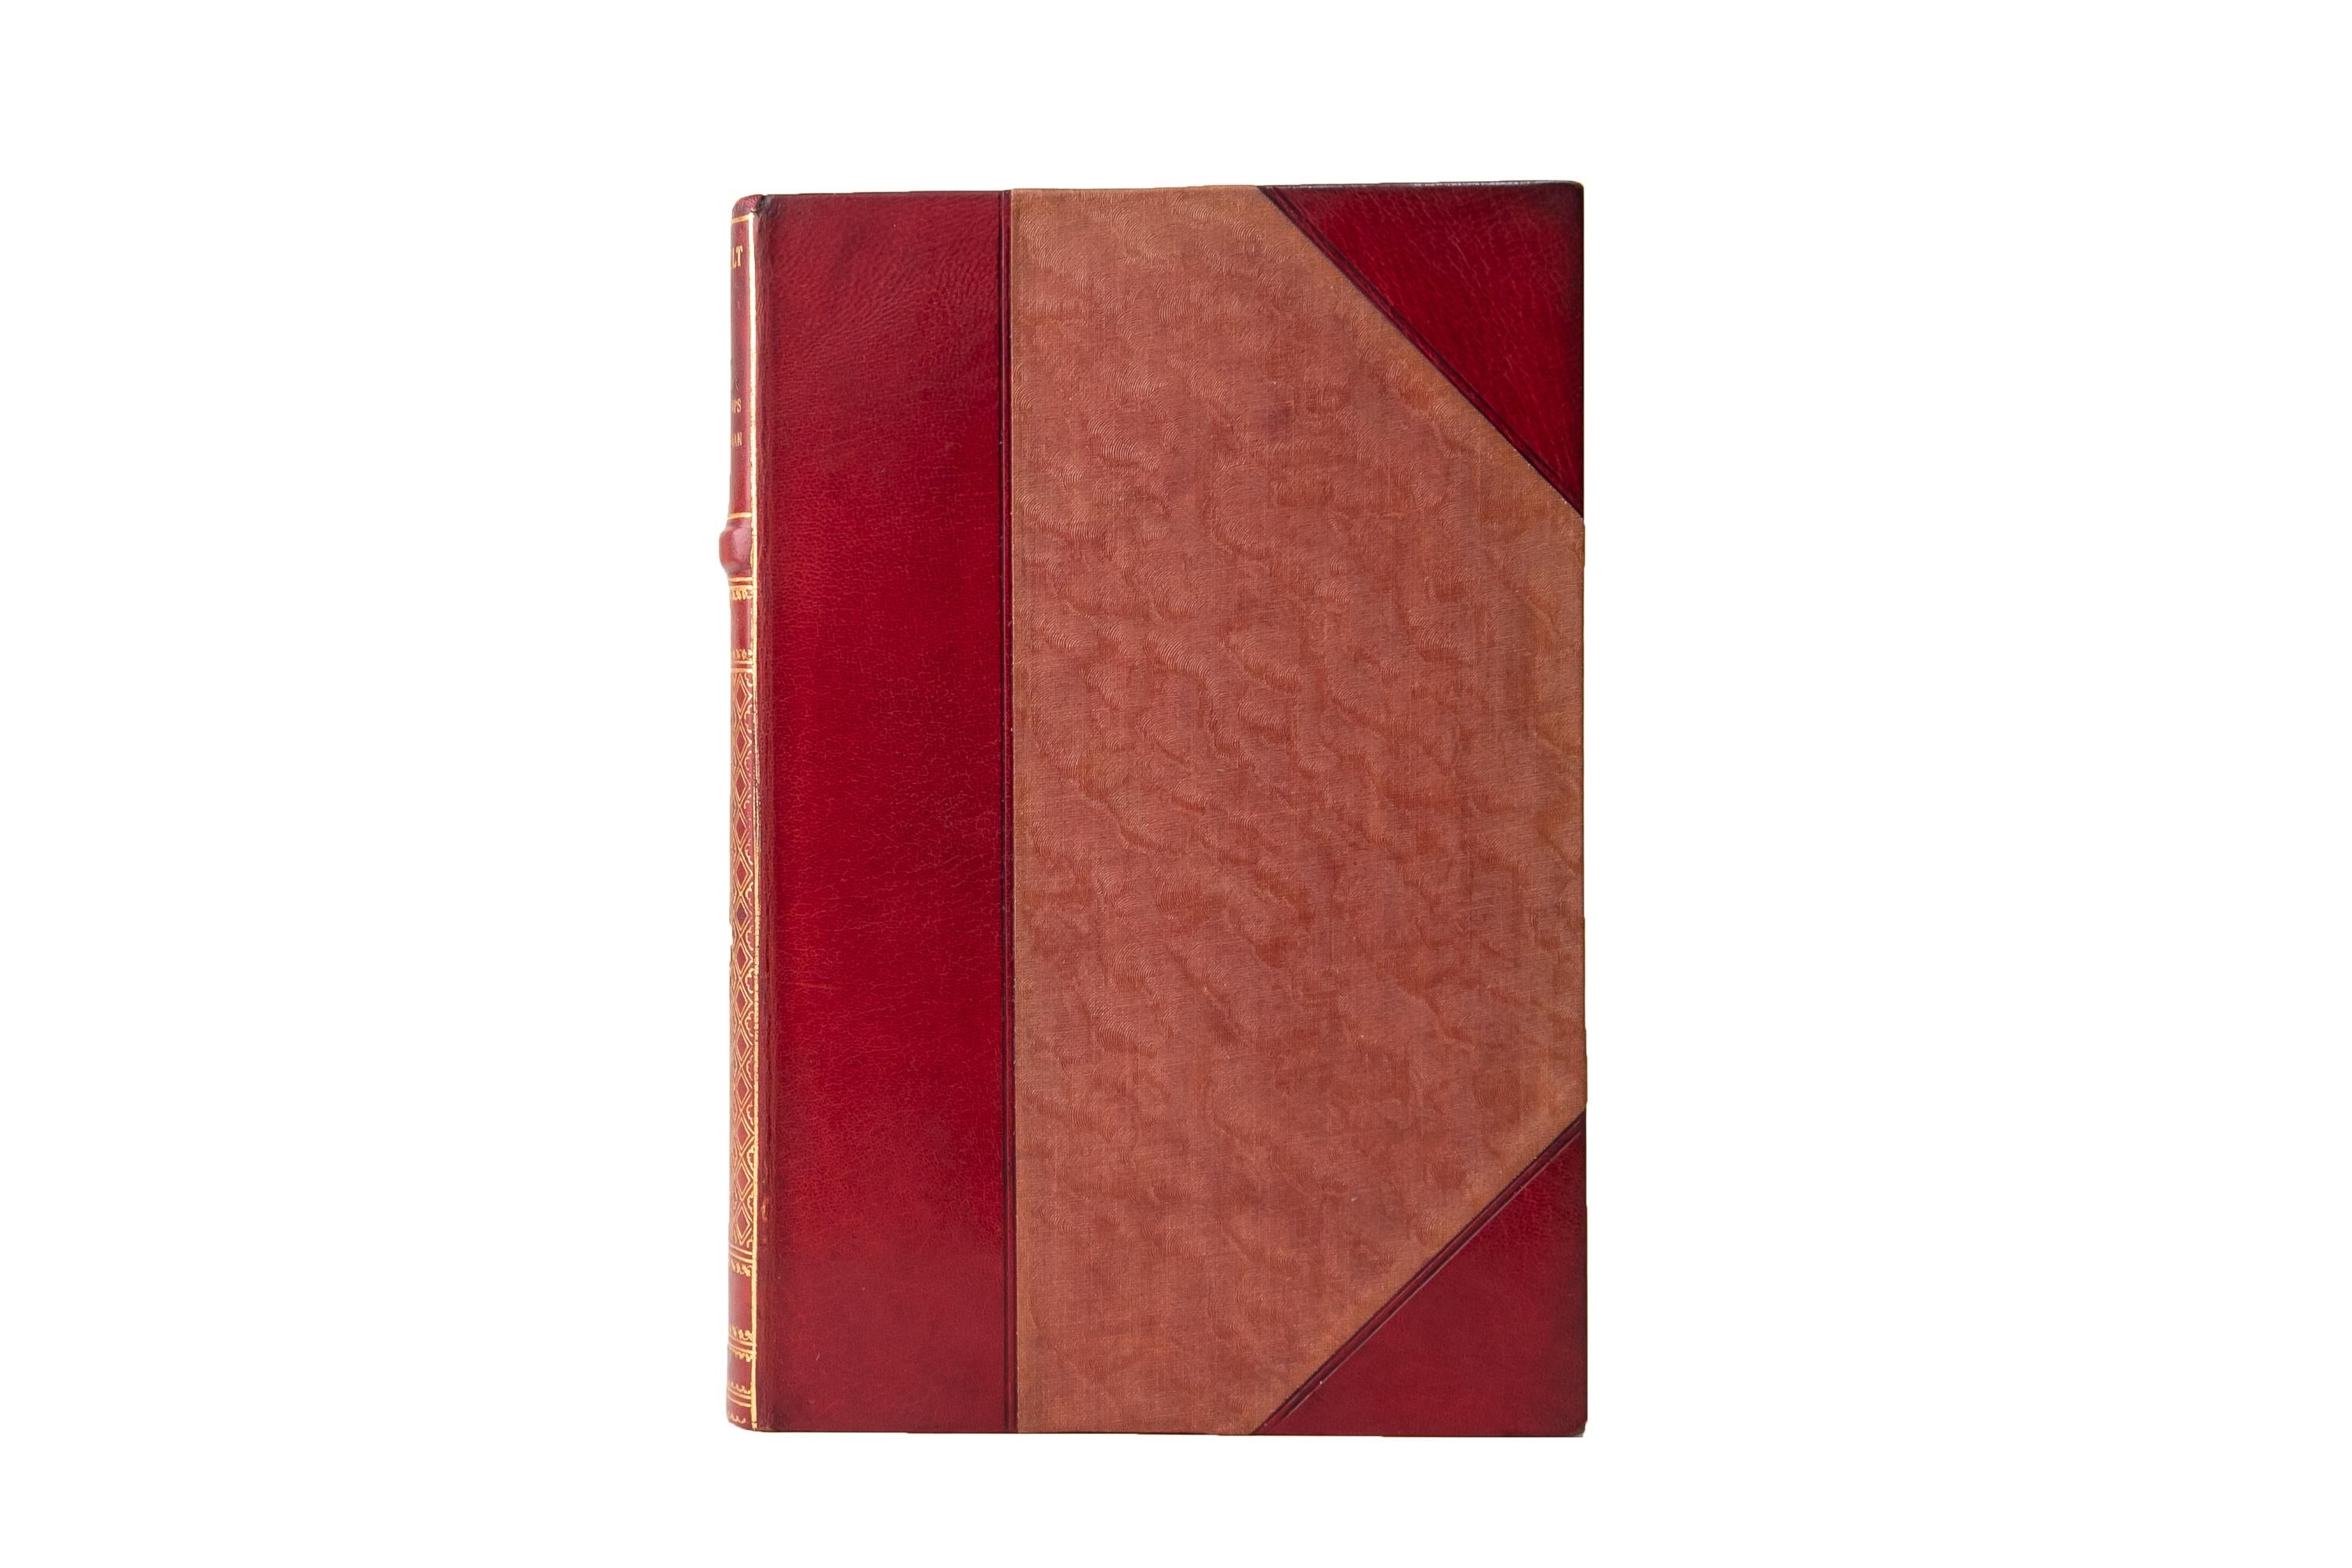 20 Volumes. Theodore Roosevelt, The Works. National Edition. Bound in 3/4 red morocco and silk boards. The spines display raised bands intricate floral and elephant panel details, bordering, and label lettering, all gilt-tooled. The top edges are